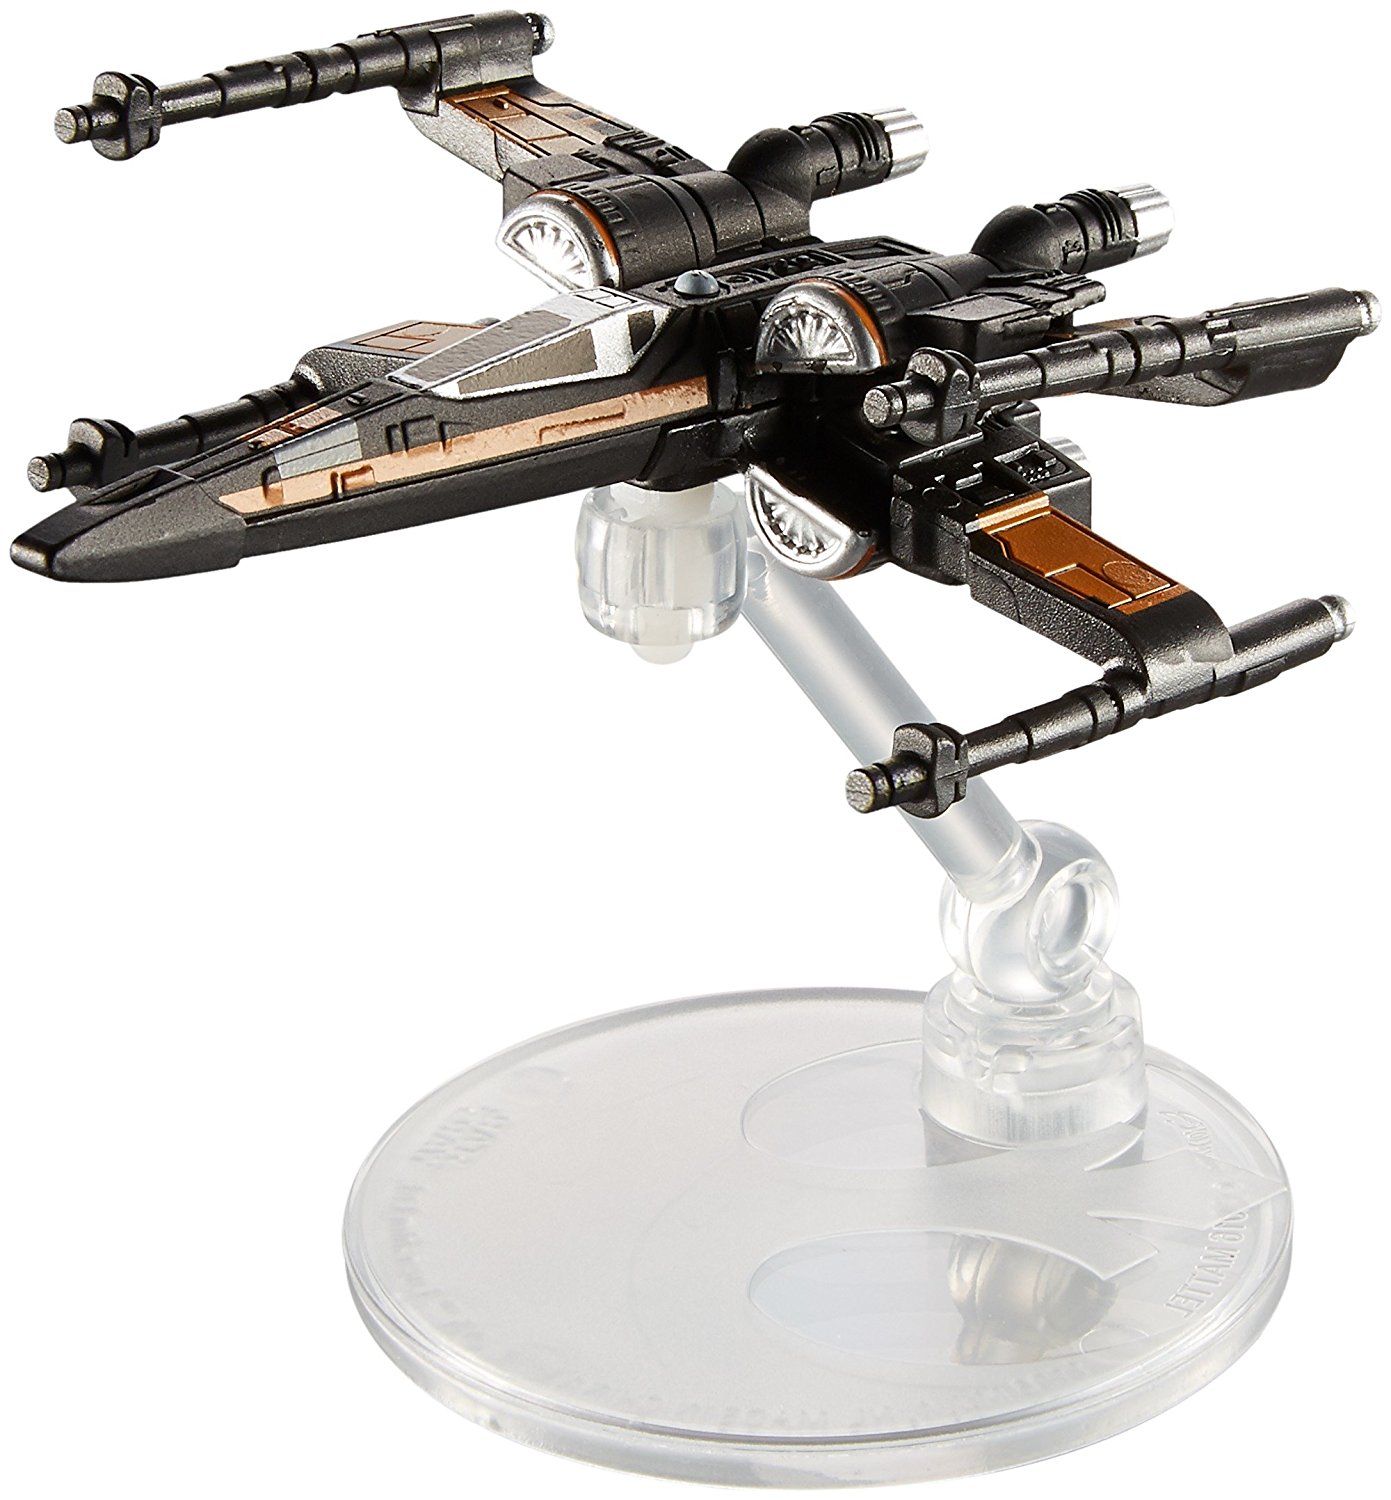 Poe’s X-Wing Fighter